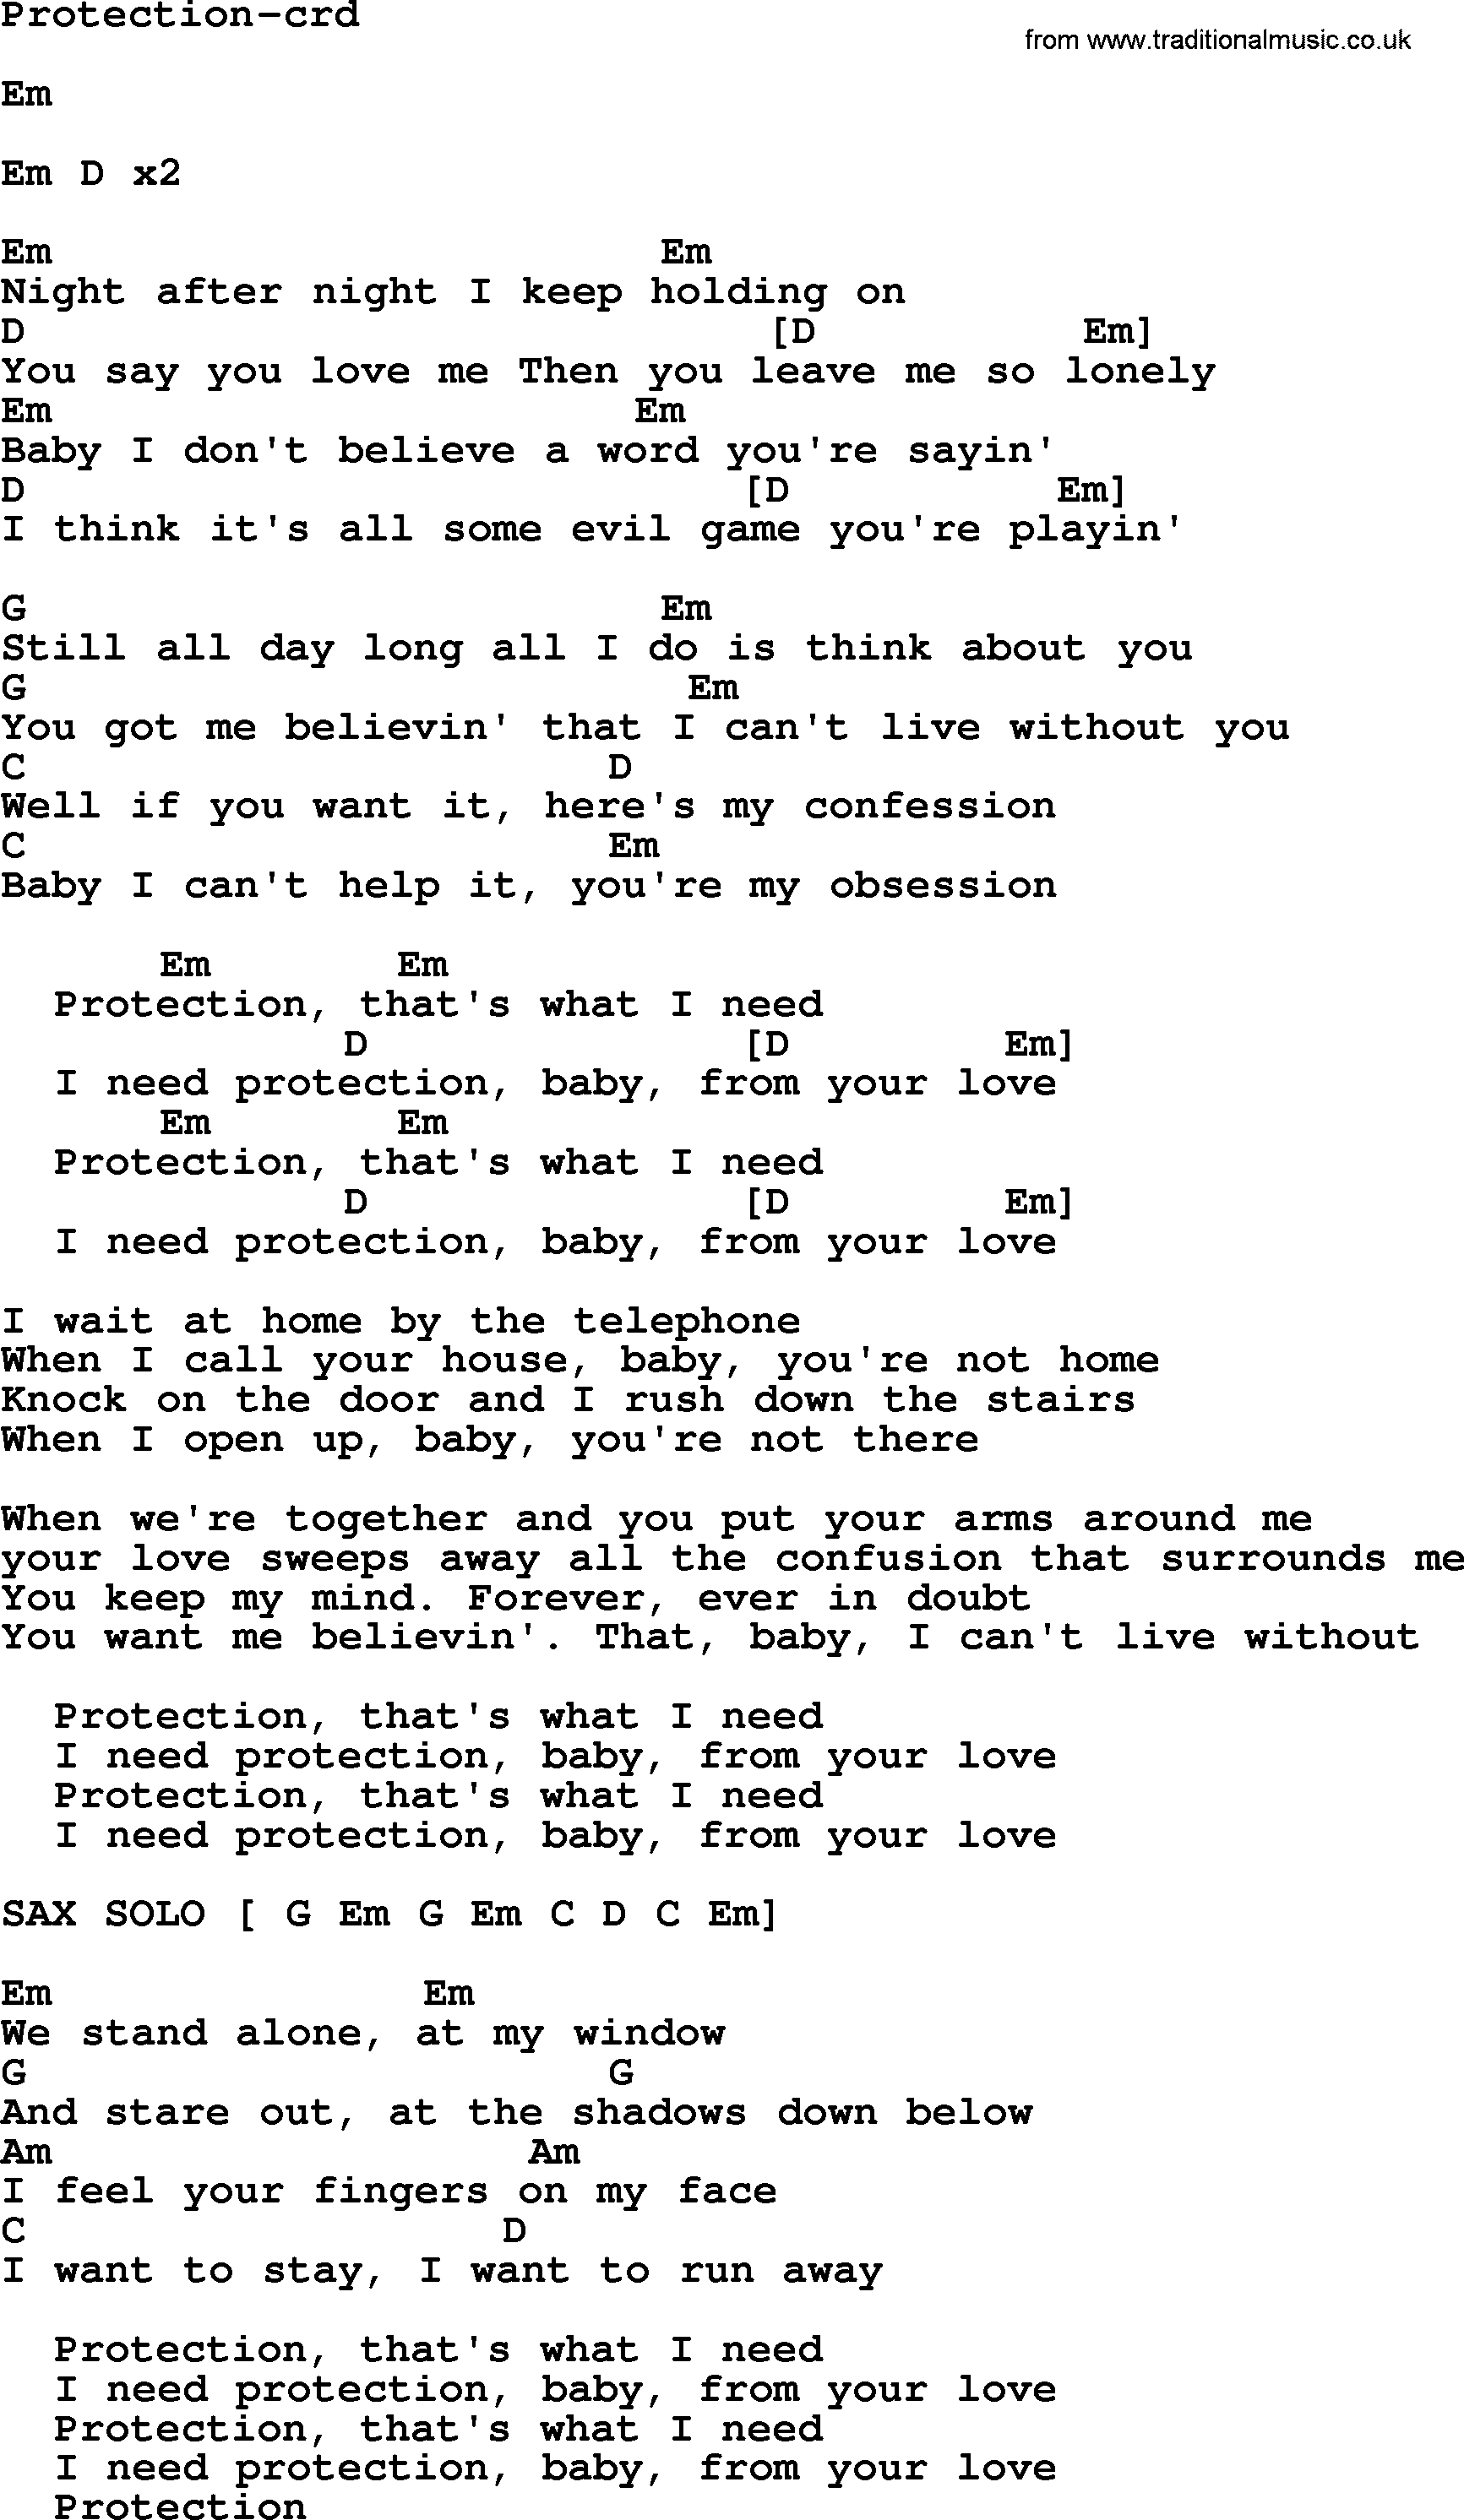 Bruce Springsteen song: Protection, lyrics and chords